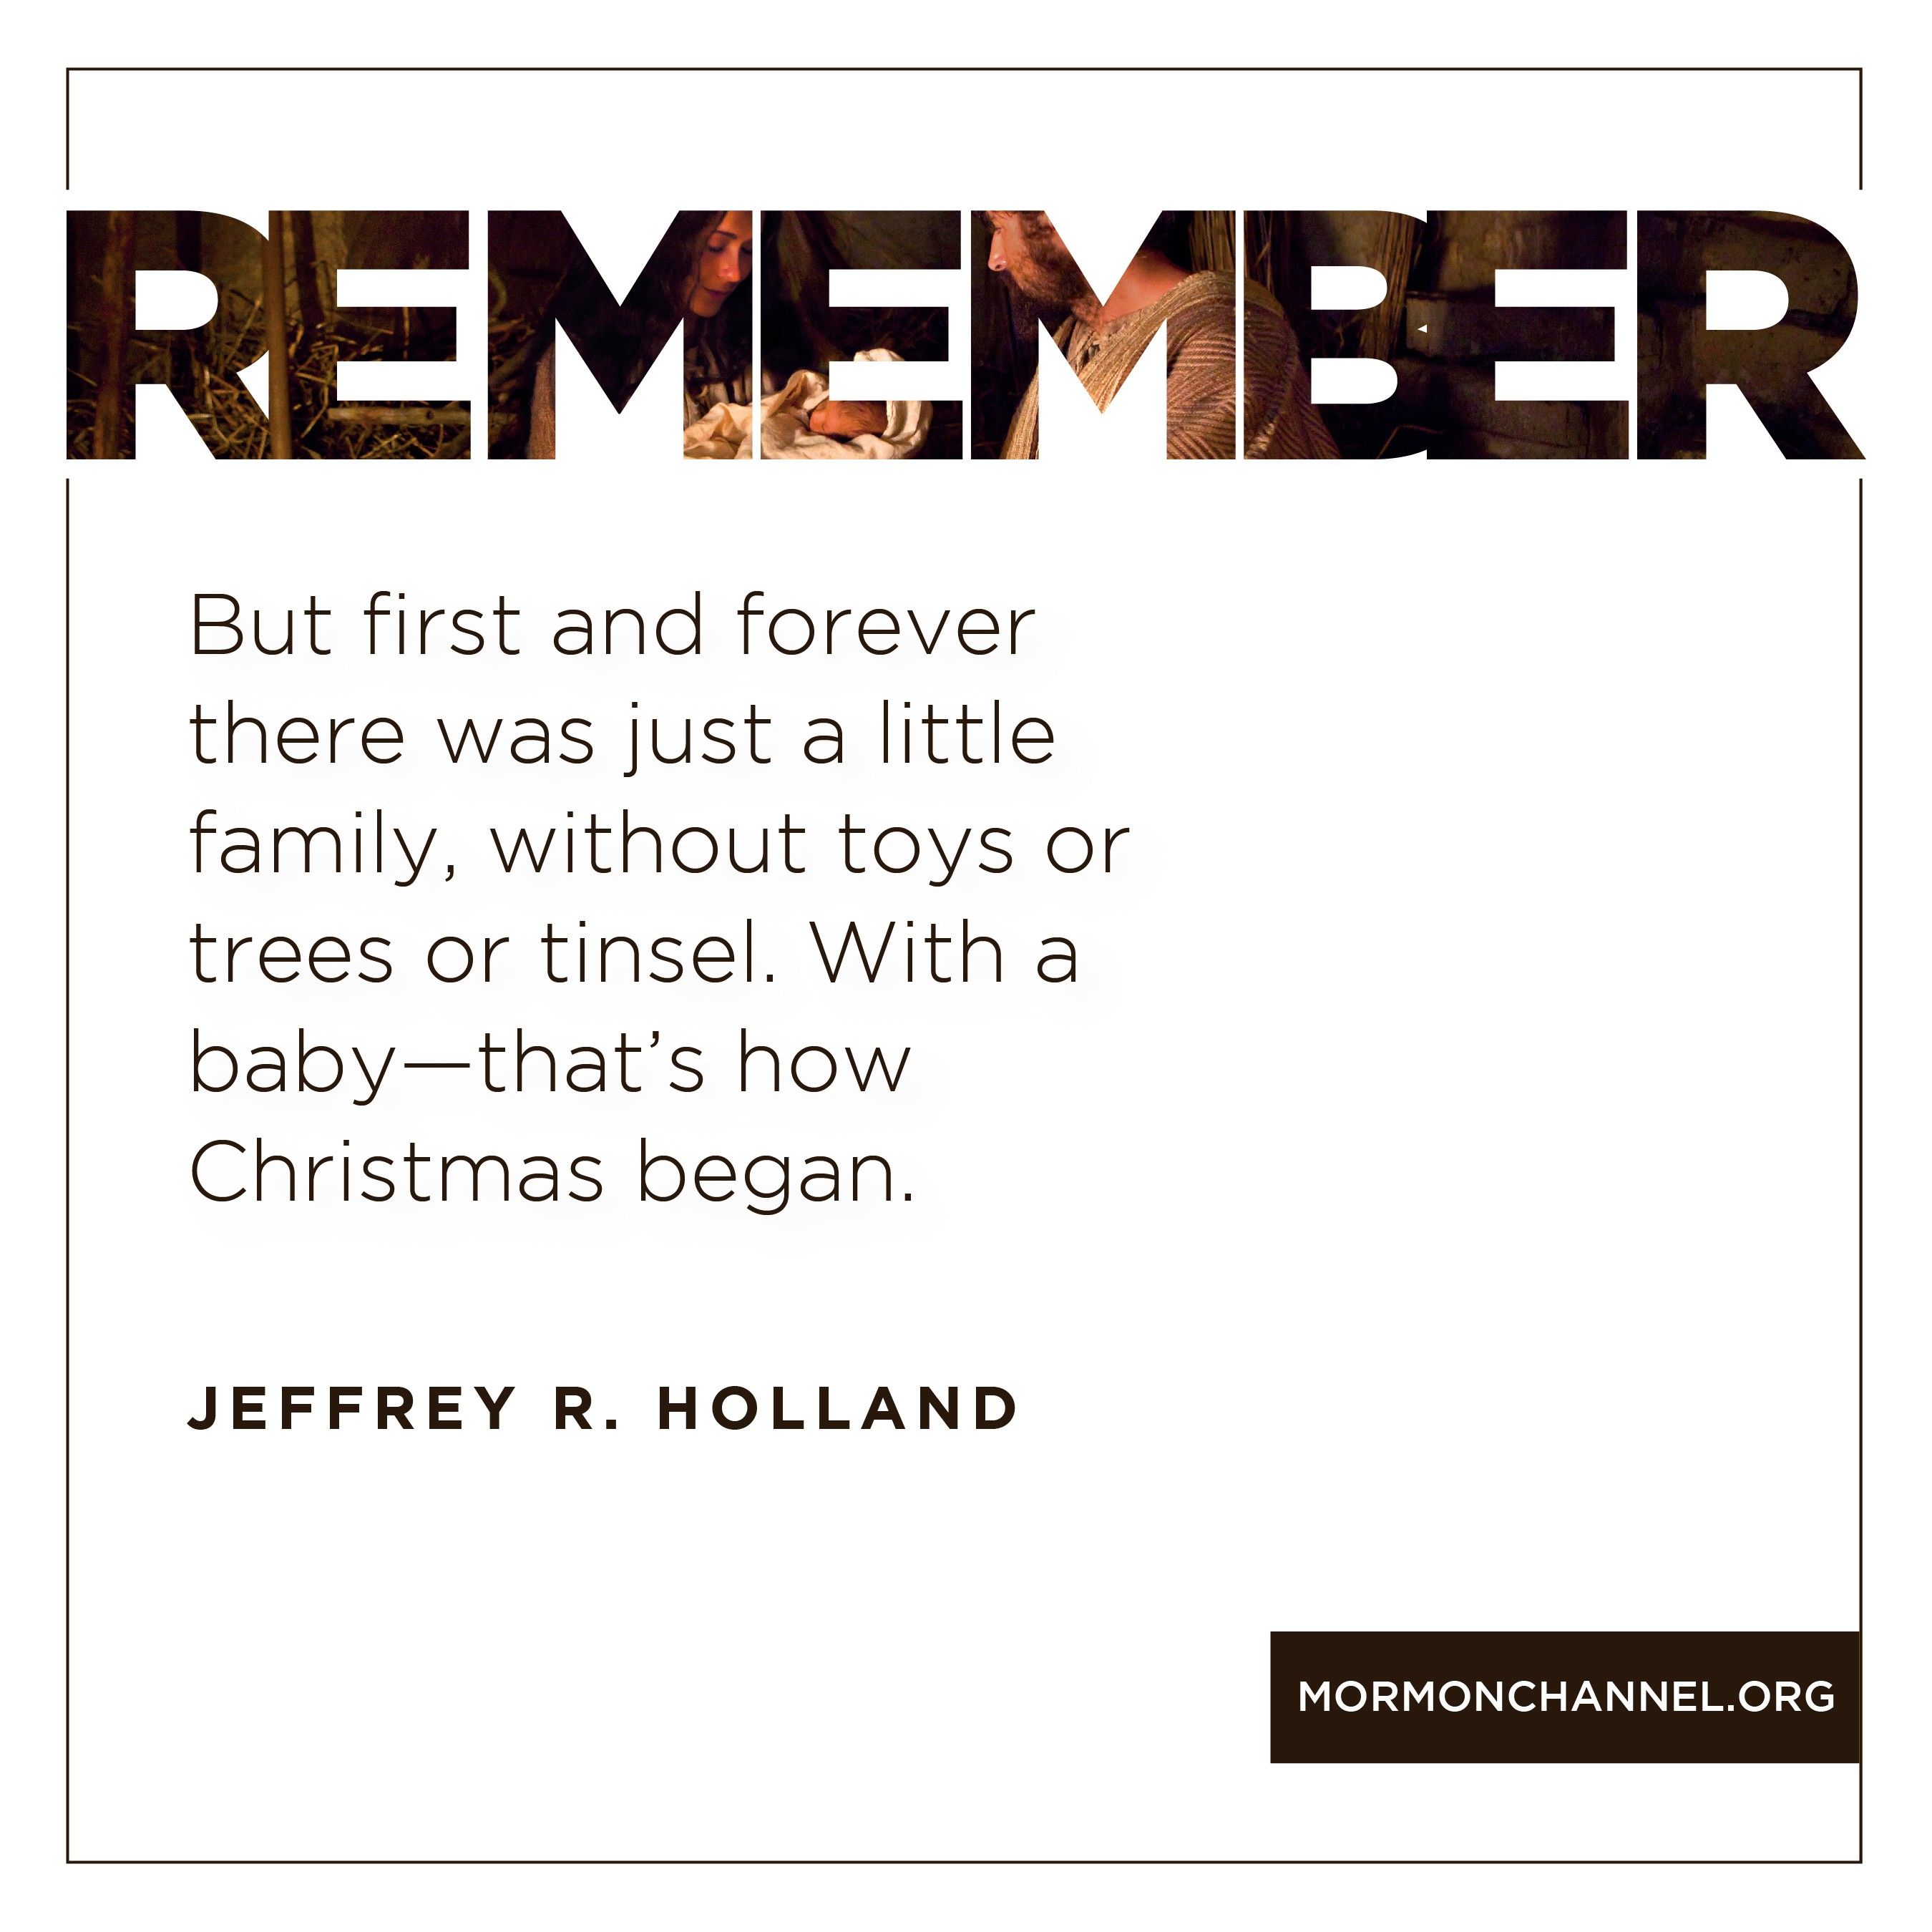 Remember: “But first and forever there was just a little family, without toys or trees or tinsel. With a baby—that’s how Christmas began.”—Elder Jeffrey R. Holland, “Maybe Christmas Doesn’t Come from a Store”